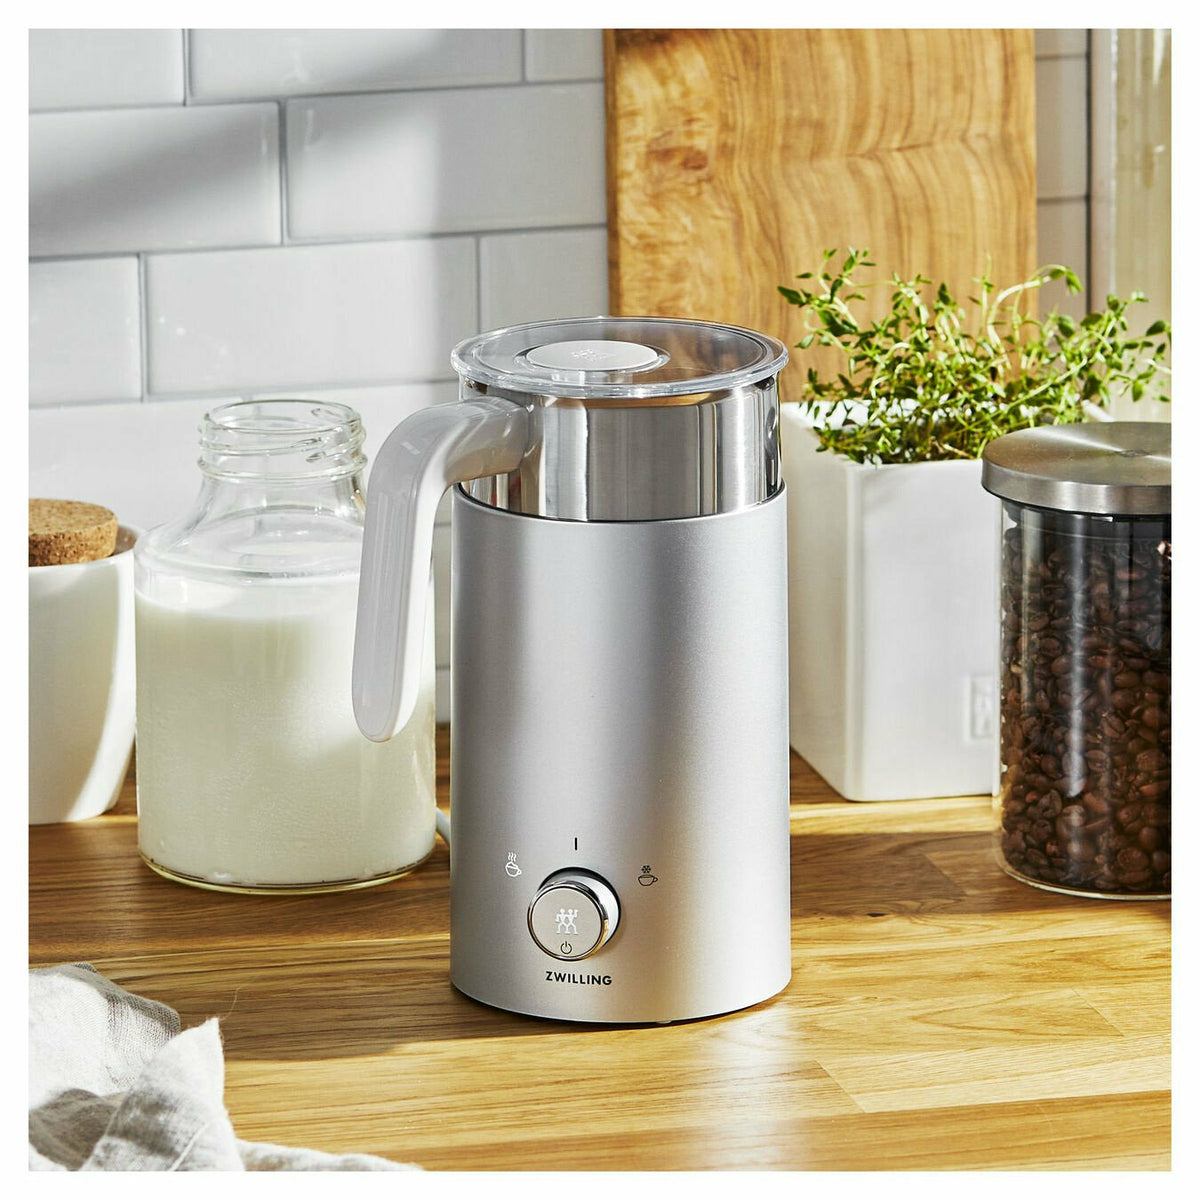 Aerolatte Milk Frother, The Original Steam-Free Frother, Satin Finish